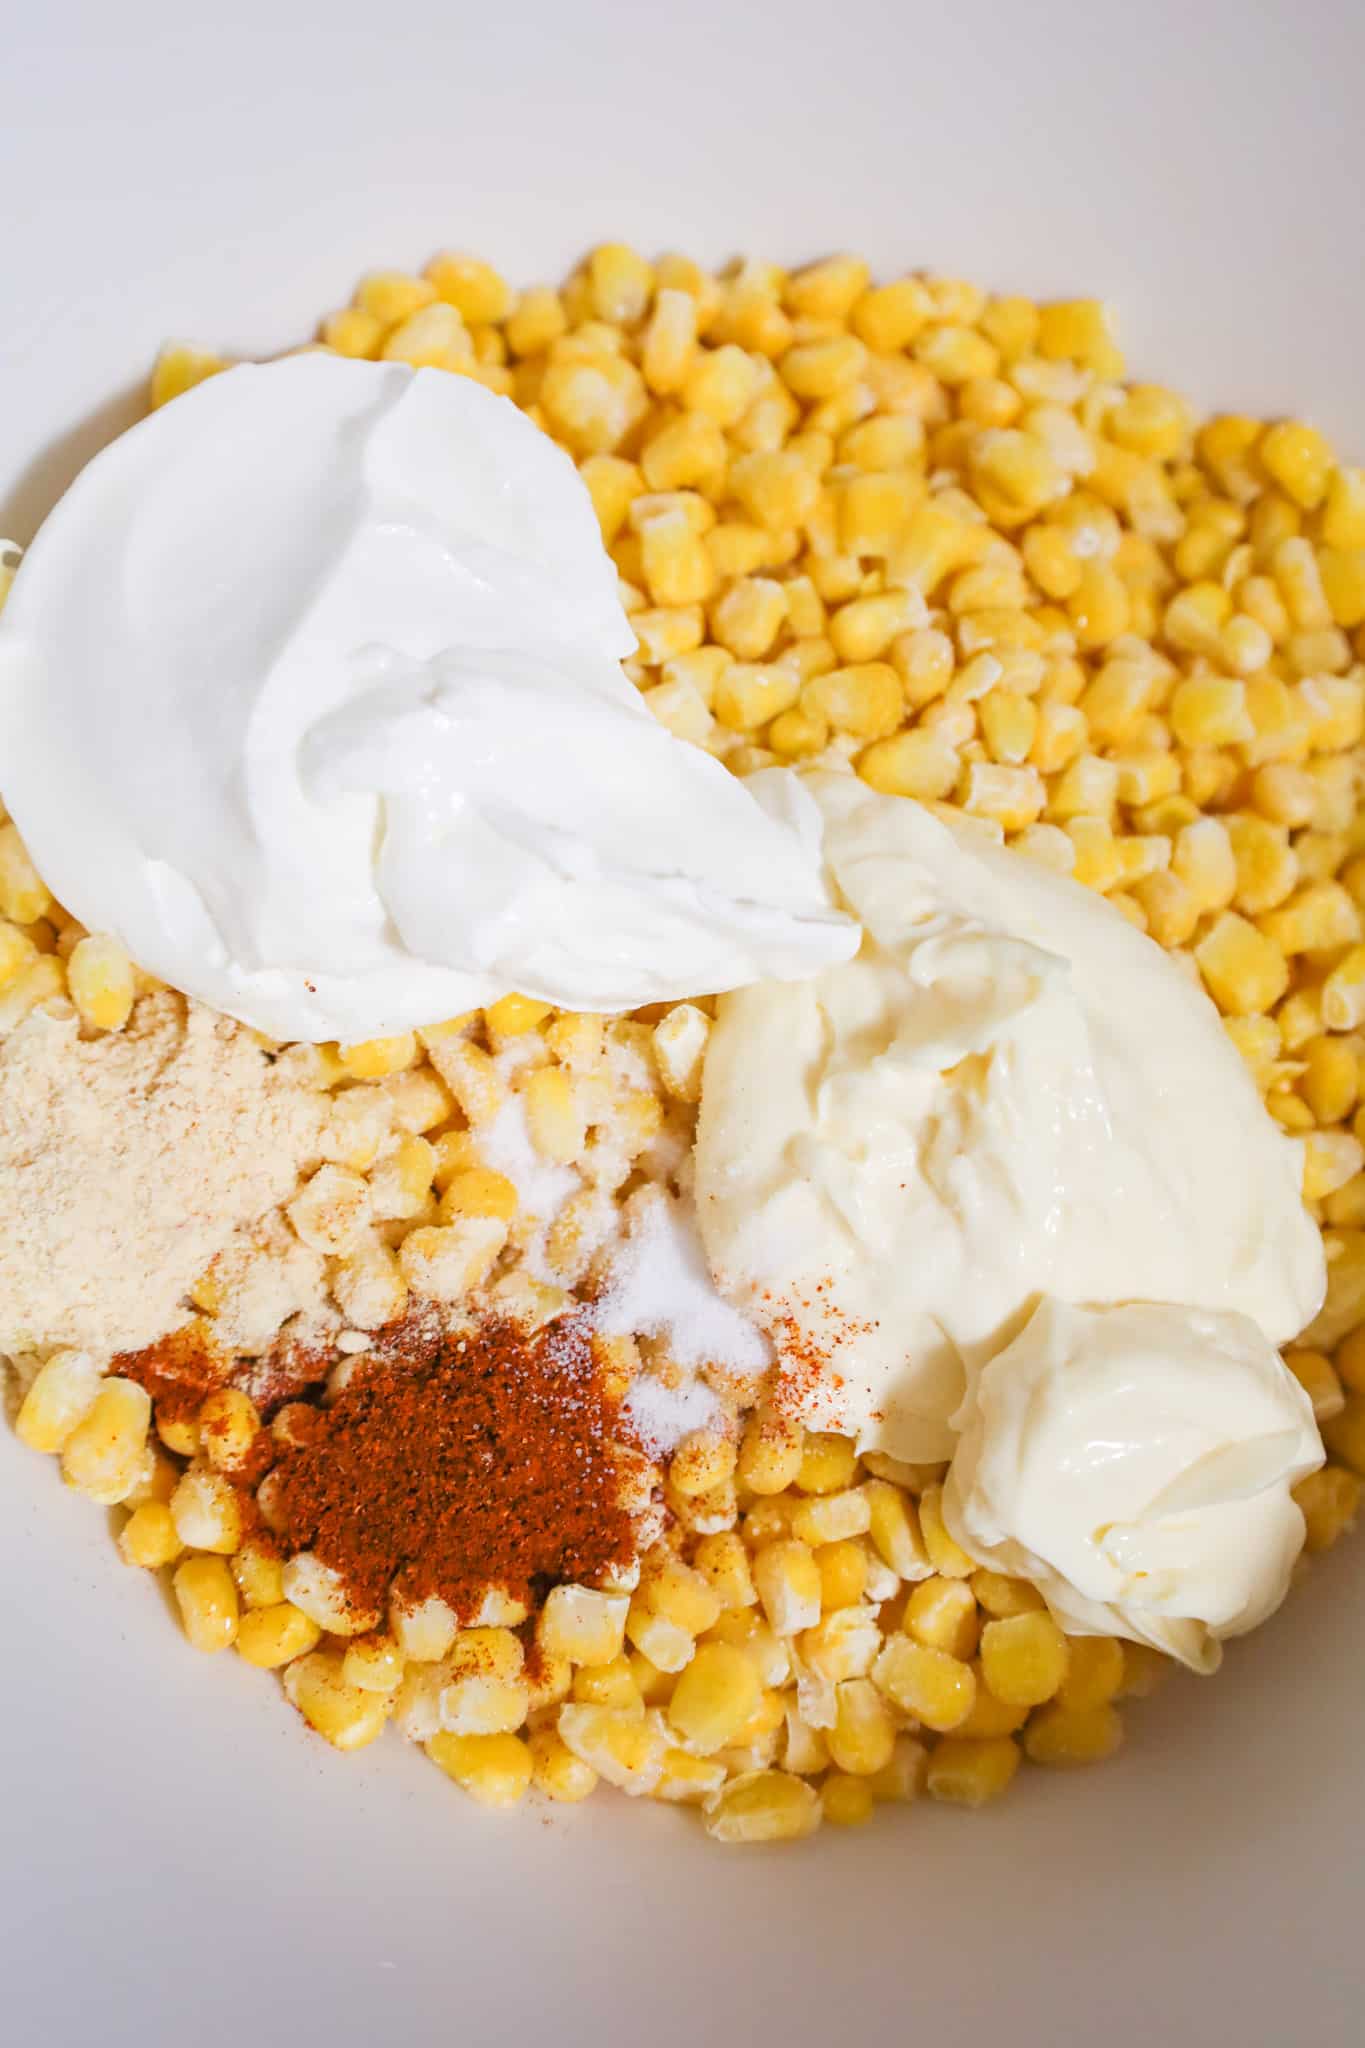 chili powder, garlic powder, mayo and sour cream on top of corn kernels in a mixing bowl